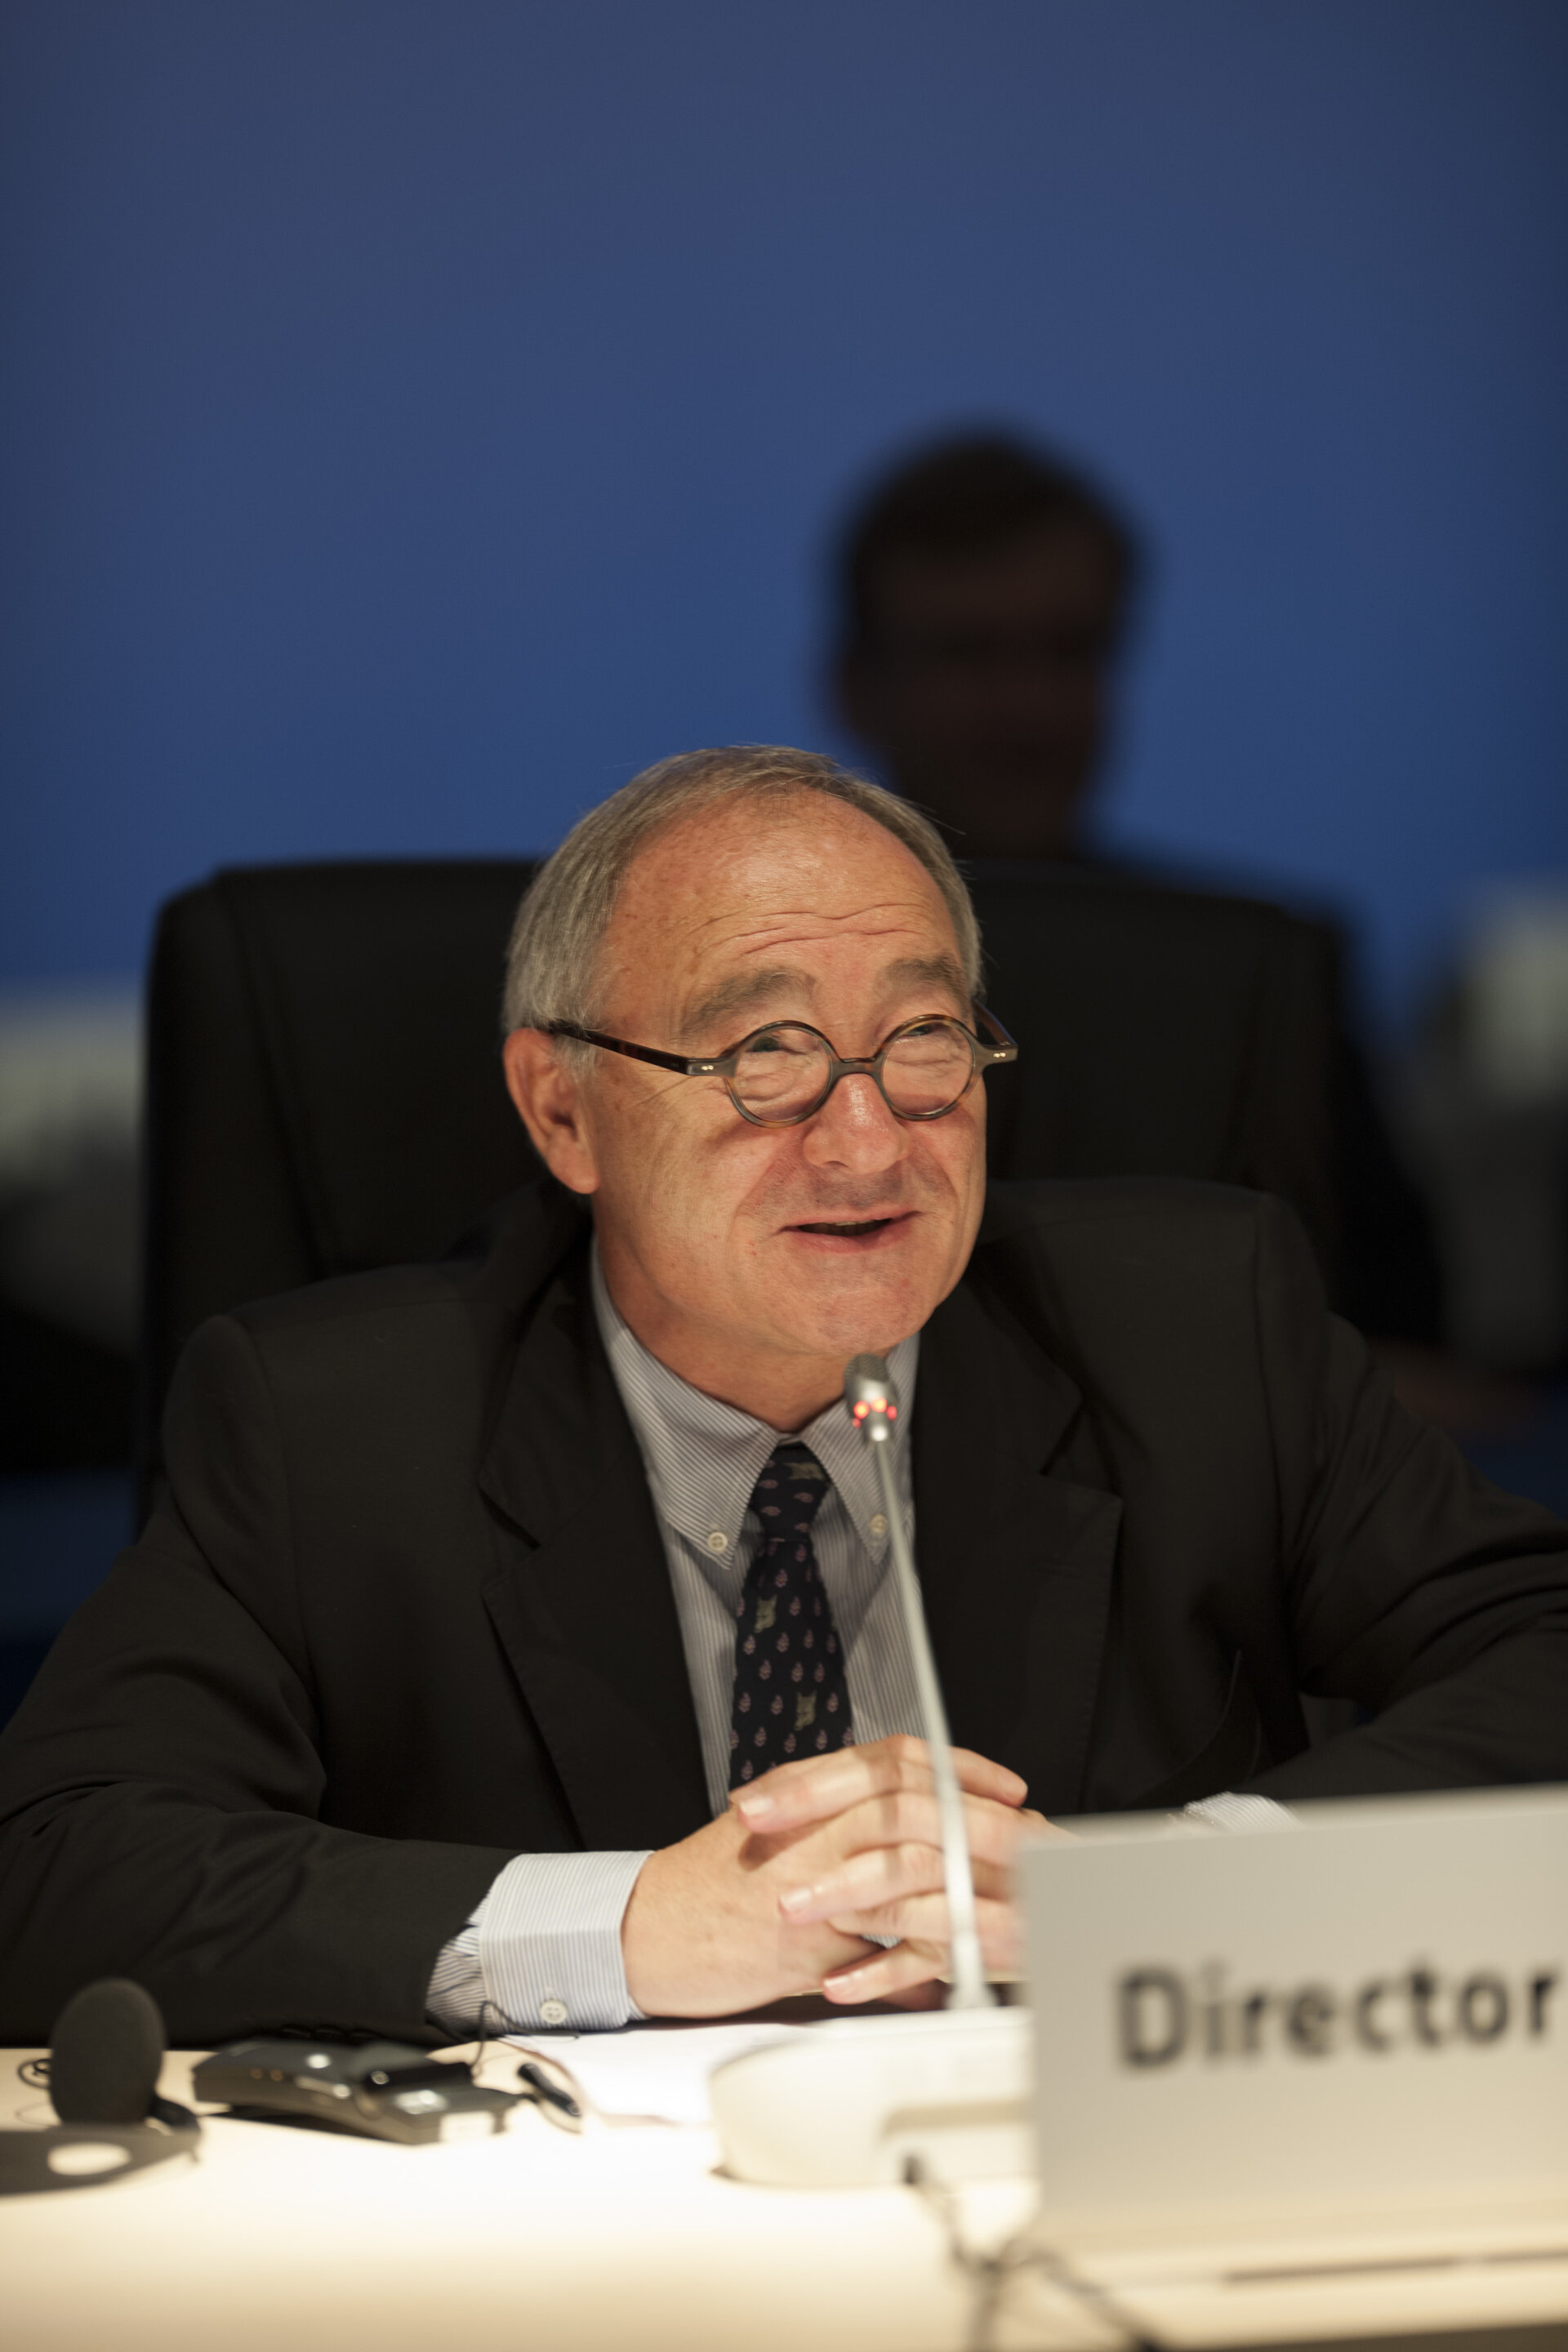 Jean-Jacques Dordain during the Ministerial Council press conference